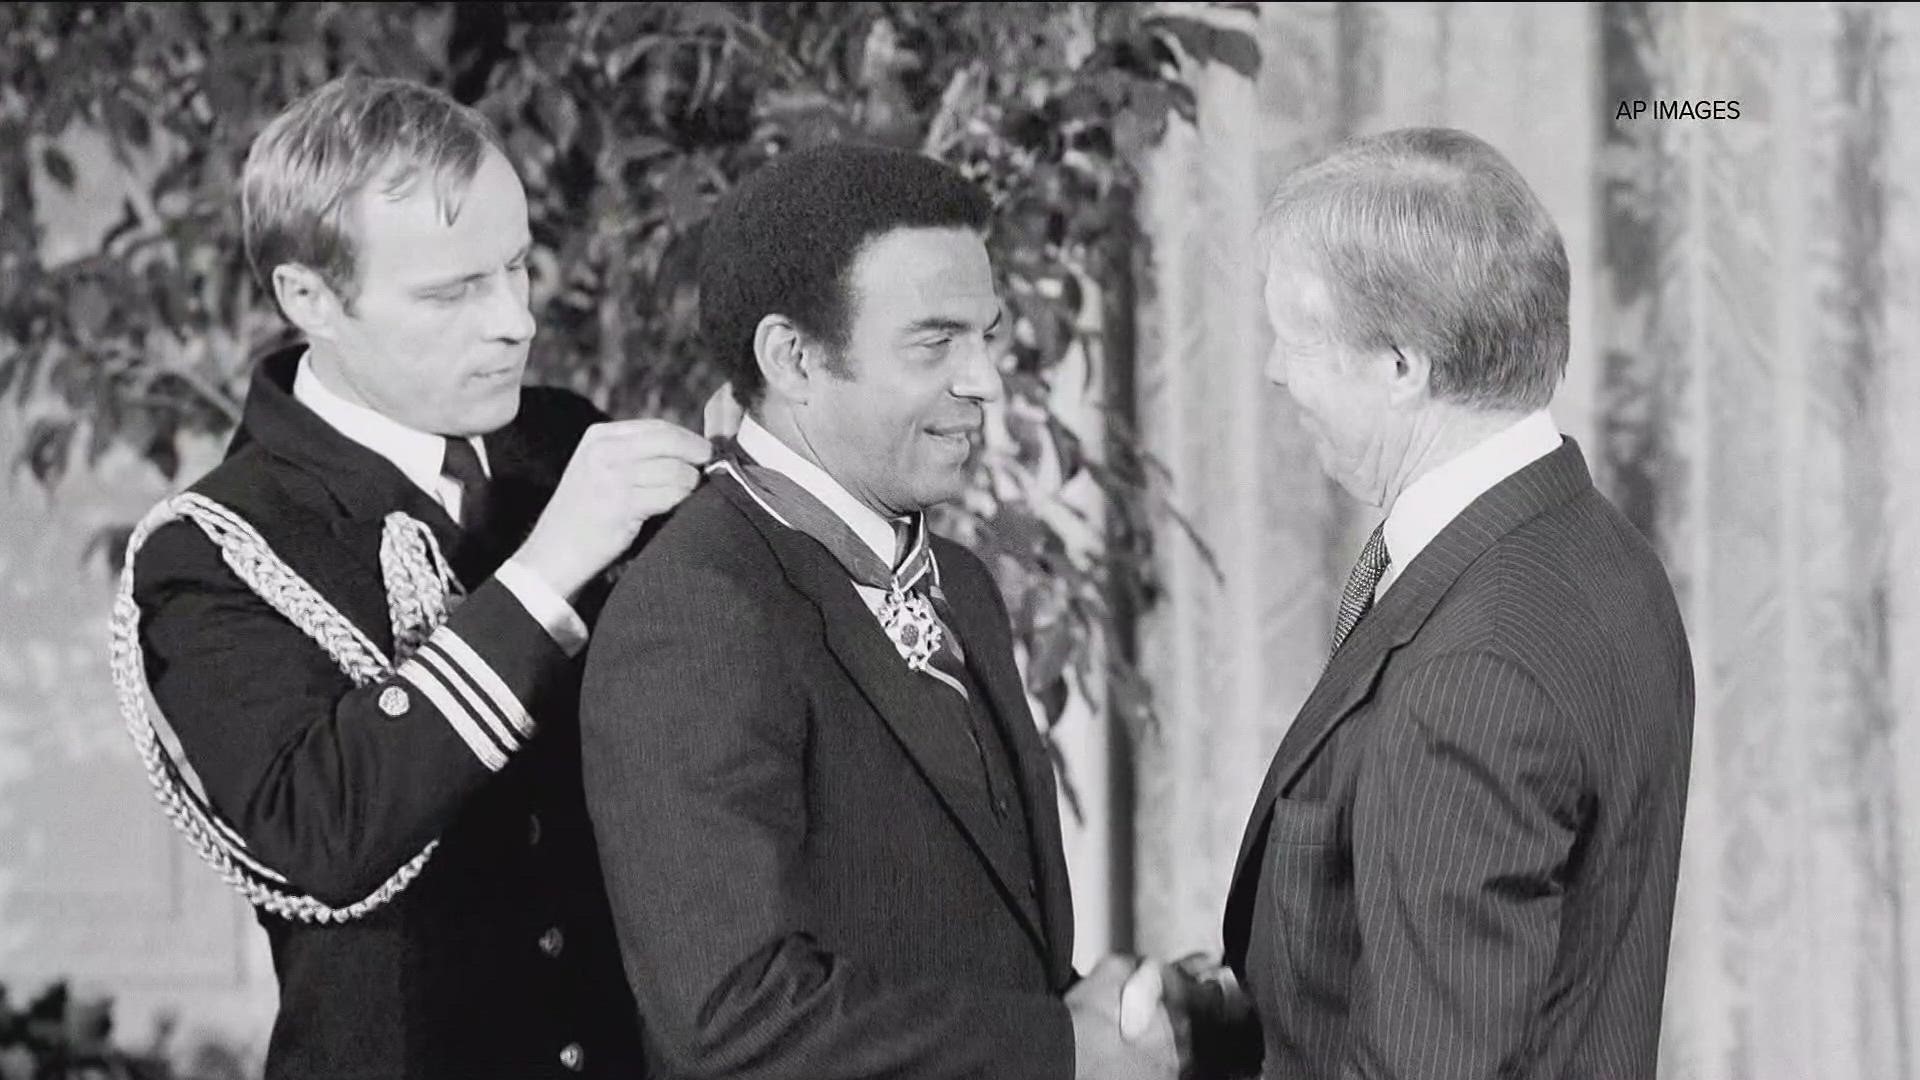 Carter appointed another Georgian, Andrew Young, to become the first Black ambassador to the United Nations in 1977.